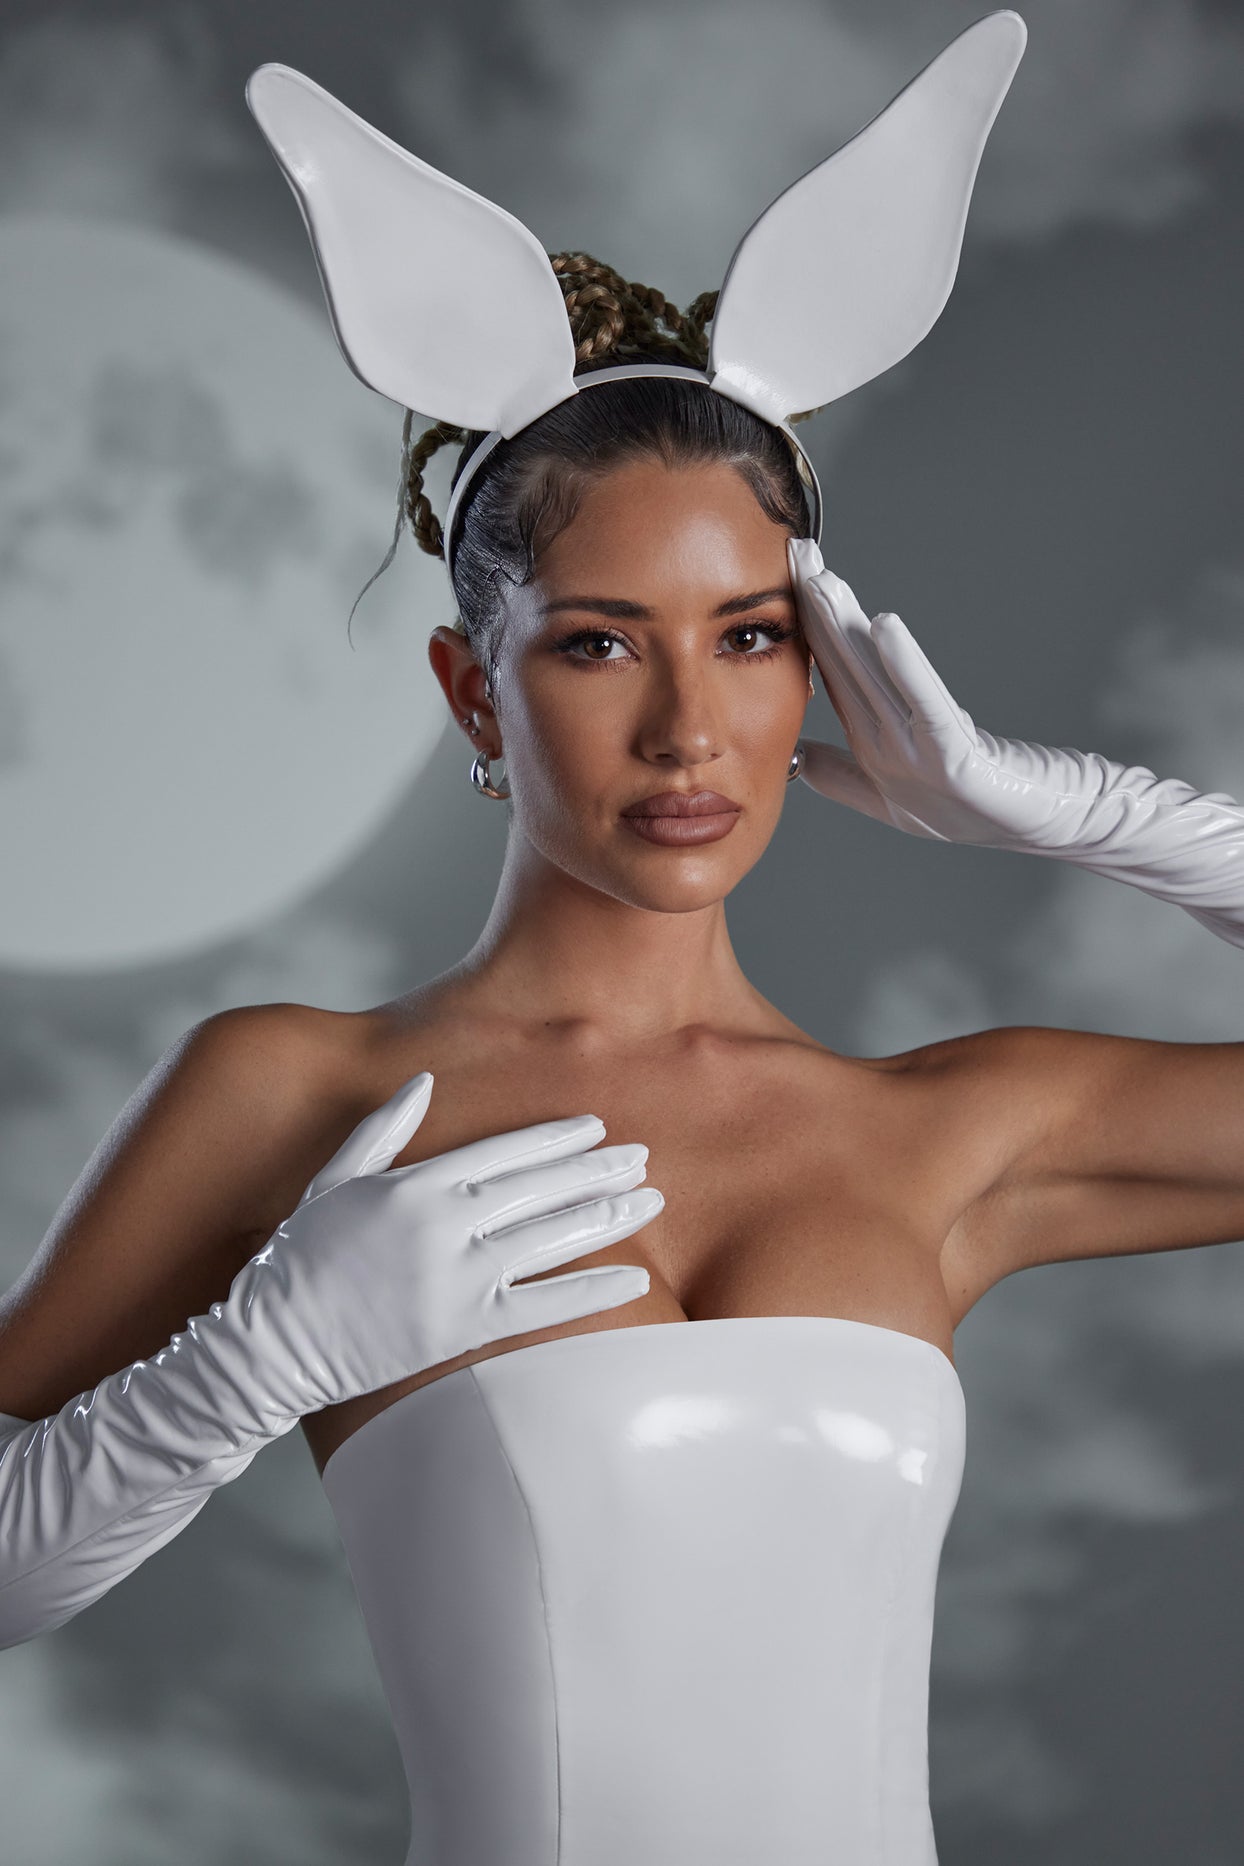 Hand Stitched Vinyl Bunny Ears in White